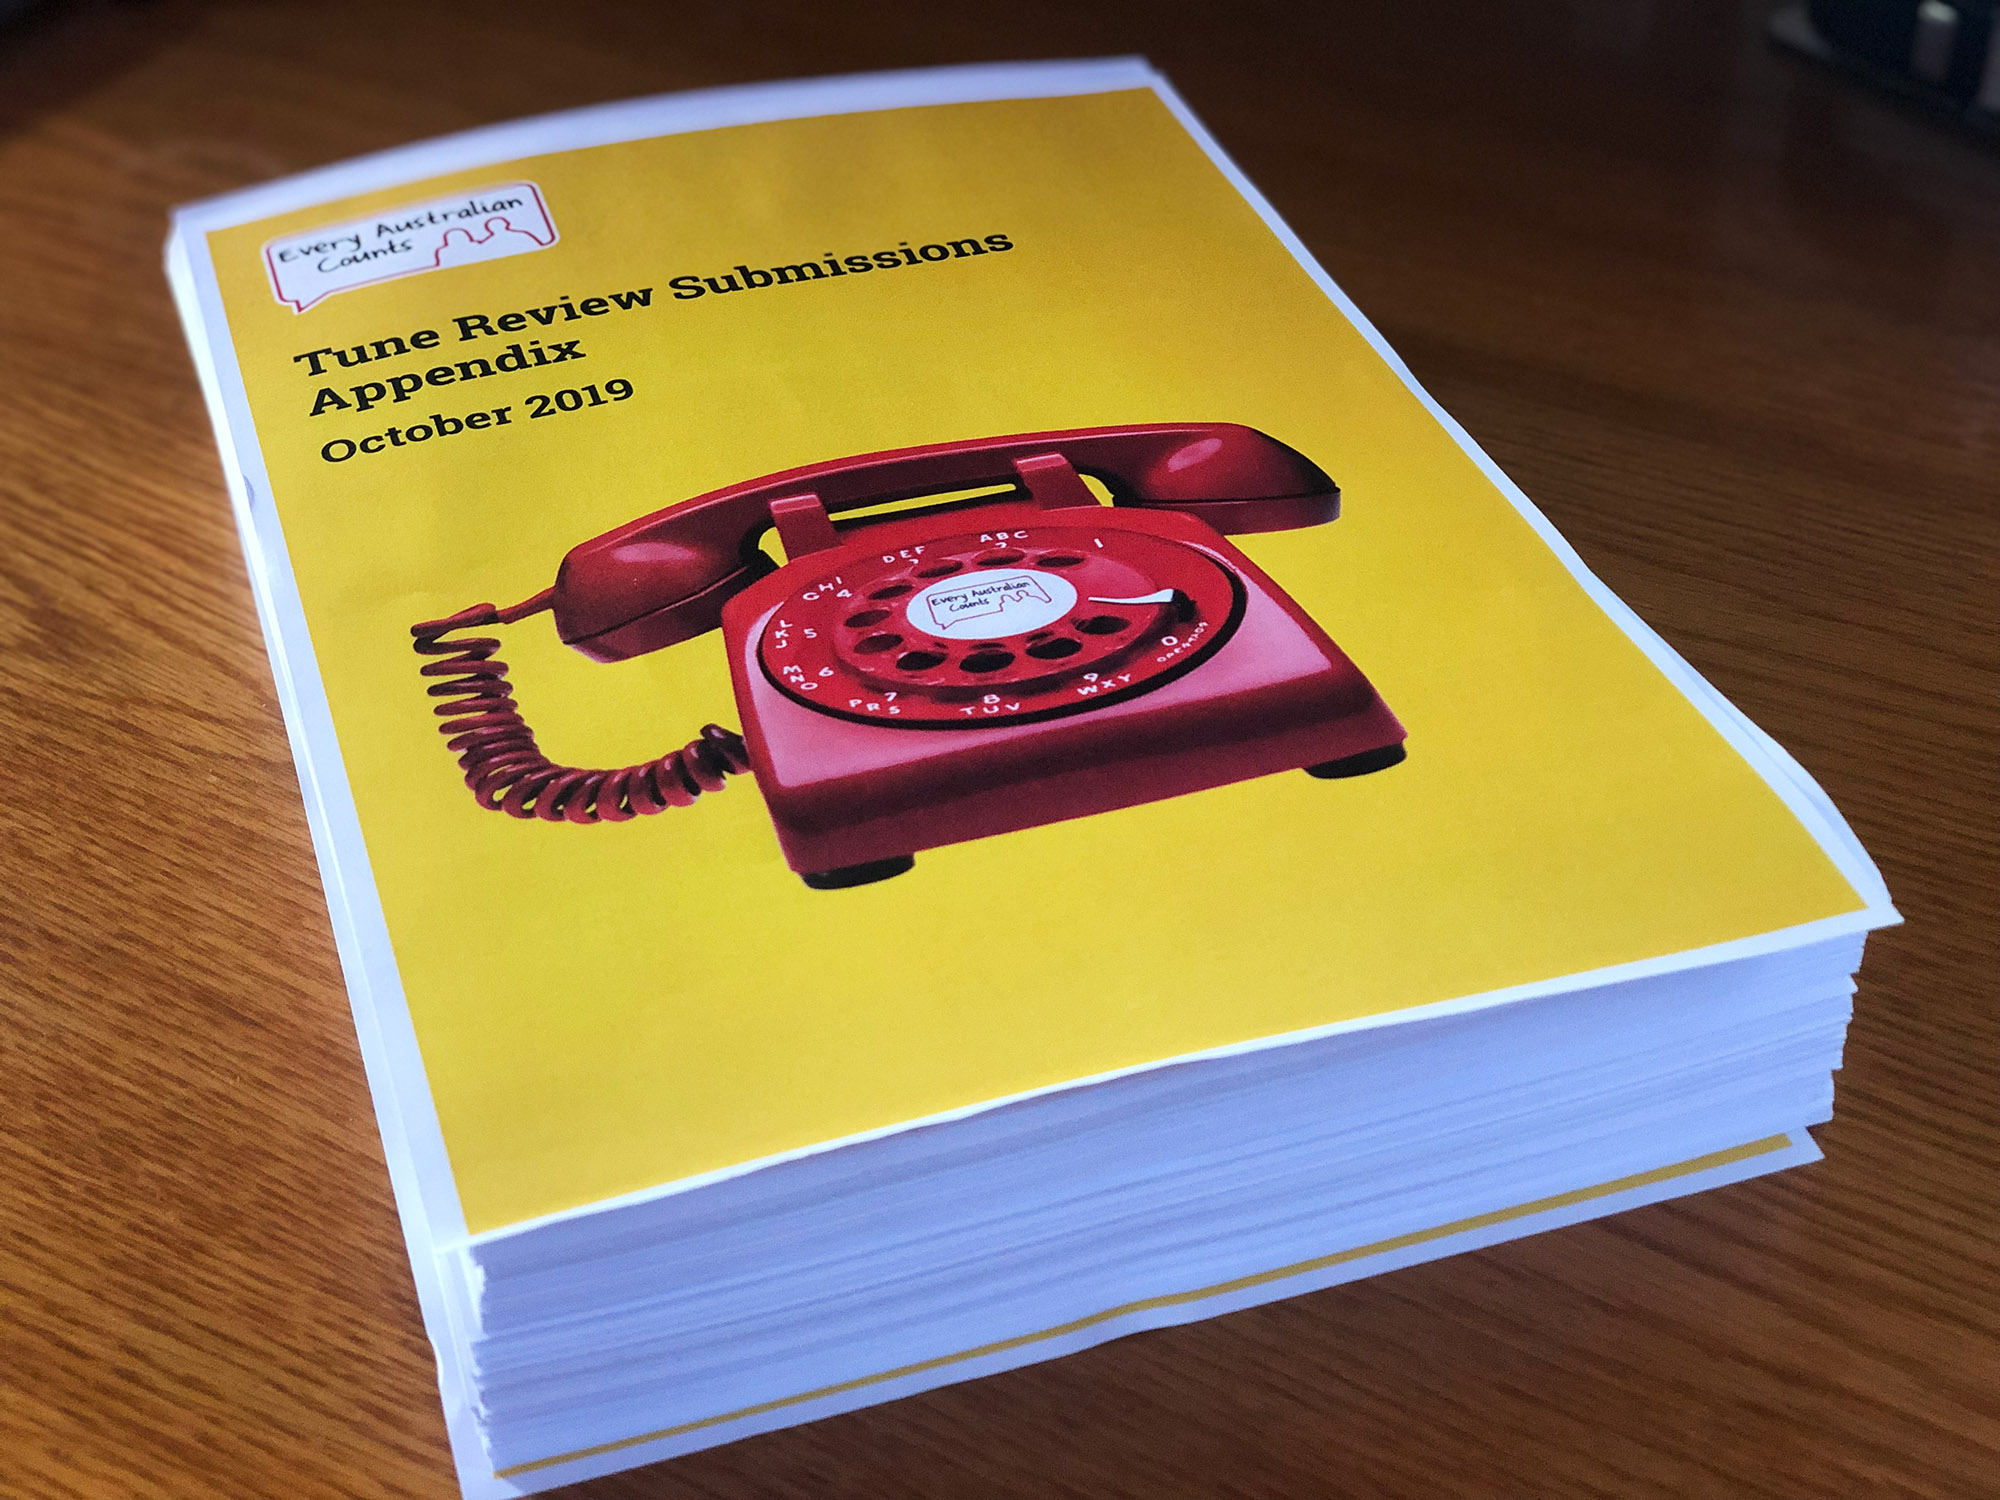 An enormous pile of papers - like a yellow pages. The pile is not bound. On the top is the front cover of the Tune Review Submissions Appendix, and a picture of a red phone on a yellow background.